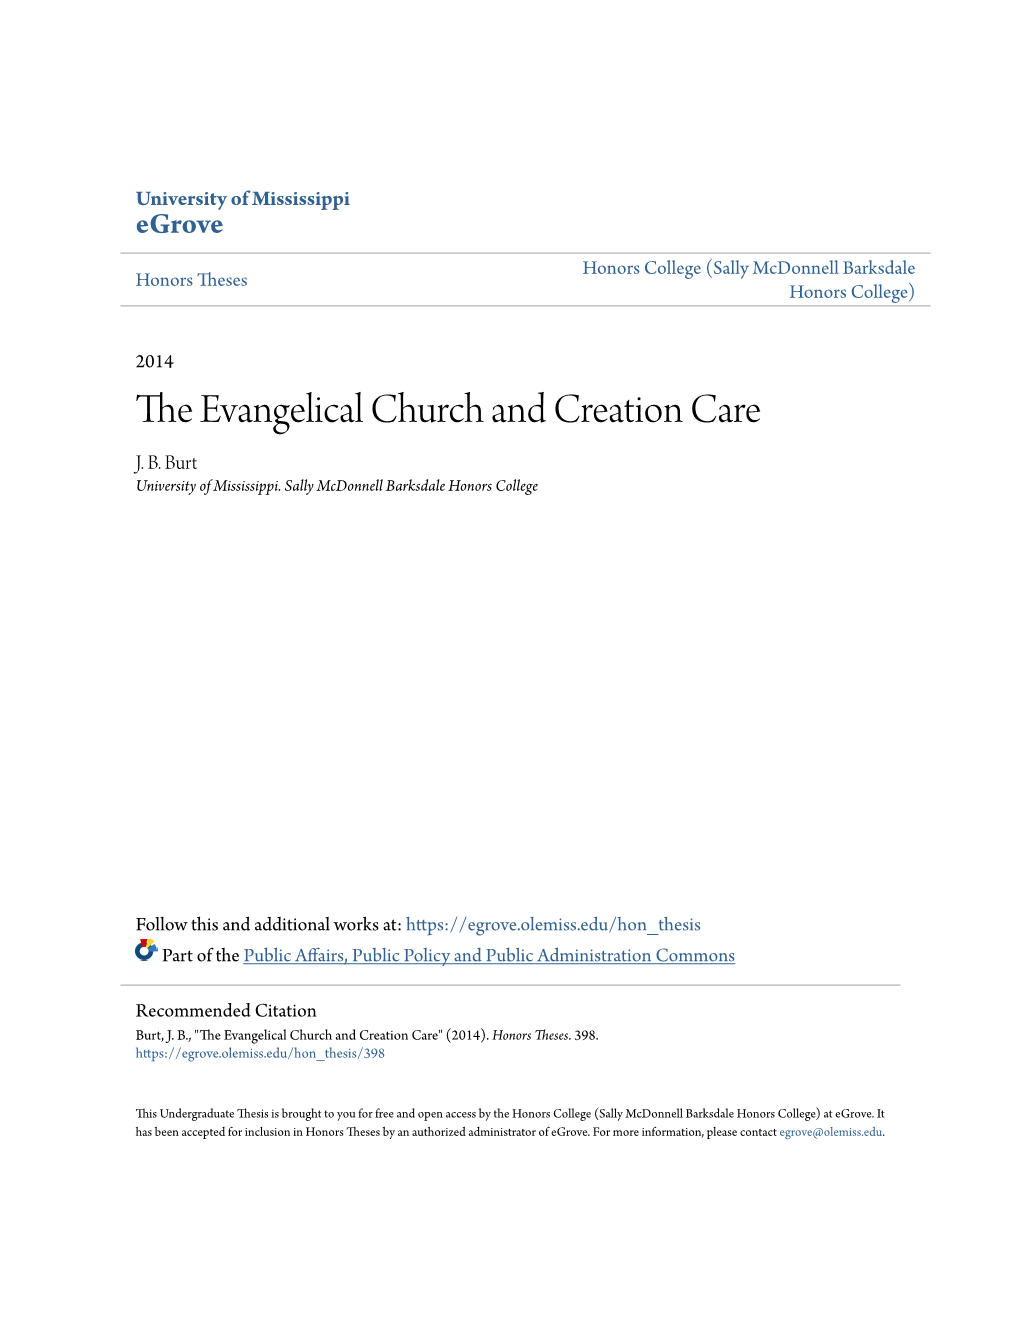 The Evangelical Church and Creation Care